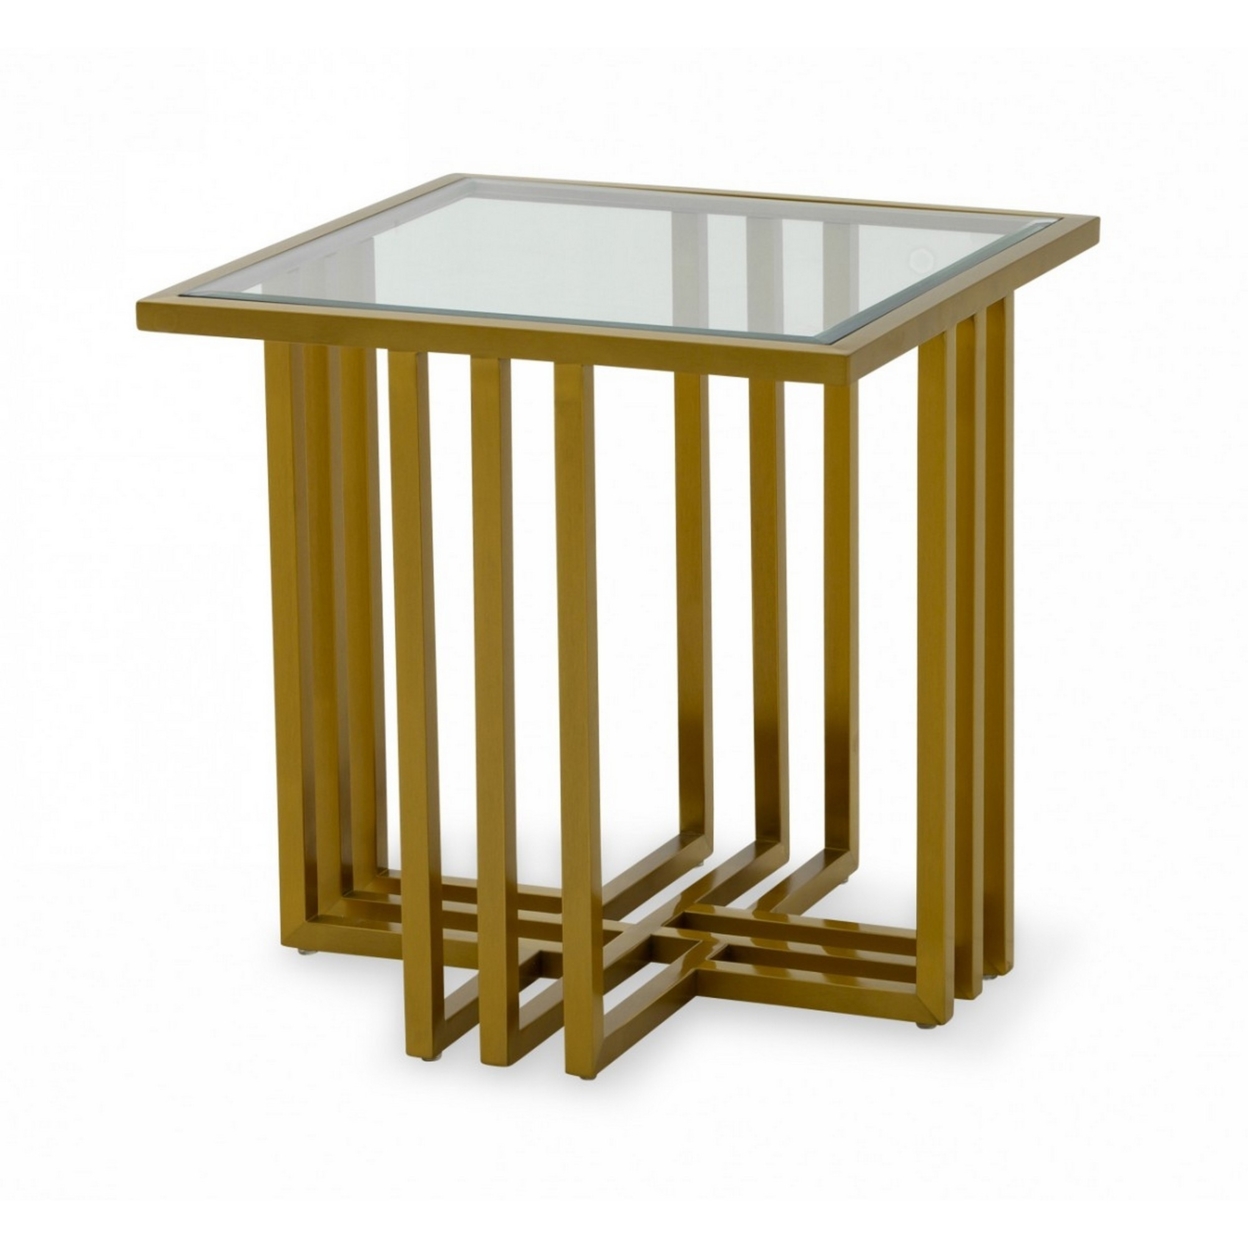 Square Glass Top End Table With Slatted Cross Base, Gold- Saltoro Sherpi